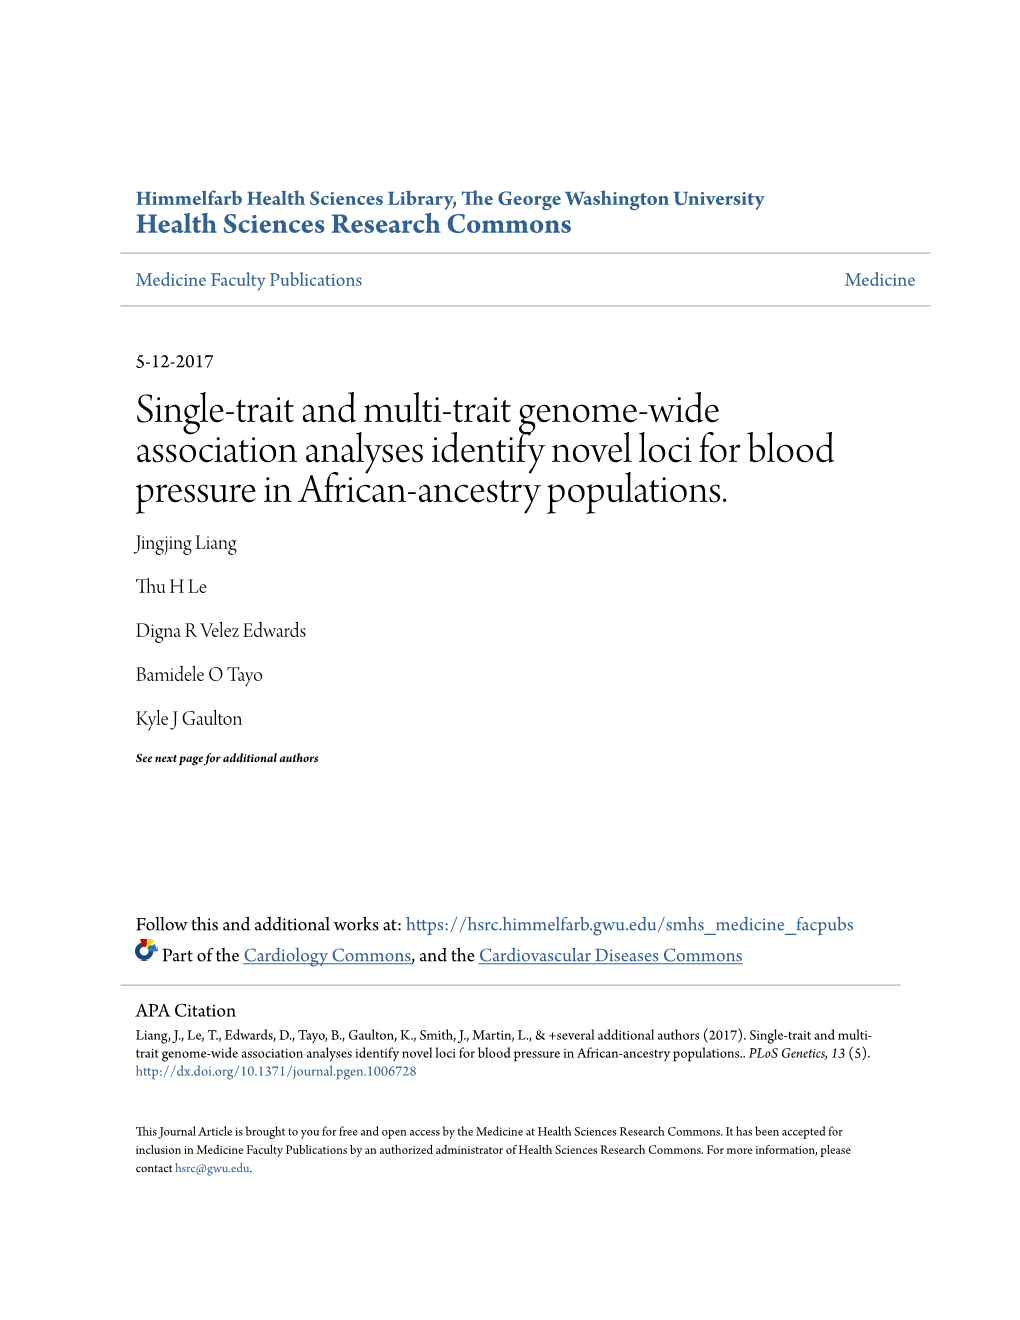 Single-Trait and Multi-Trait Genome-Wide Association Analyses Identify Novel Loci for Blood Pressure in African-Ancestry Populations